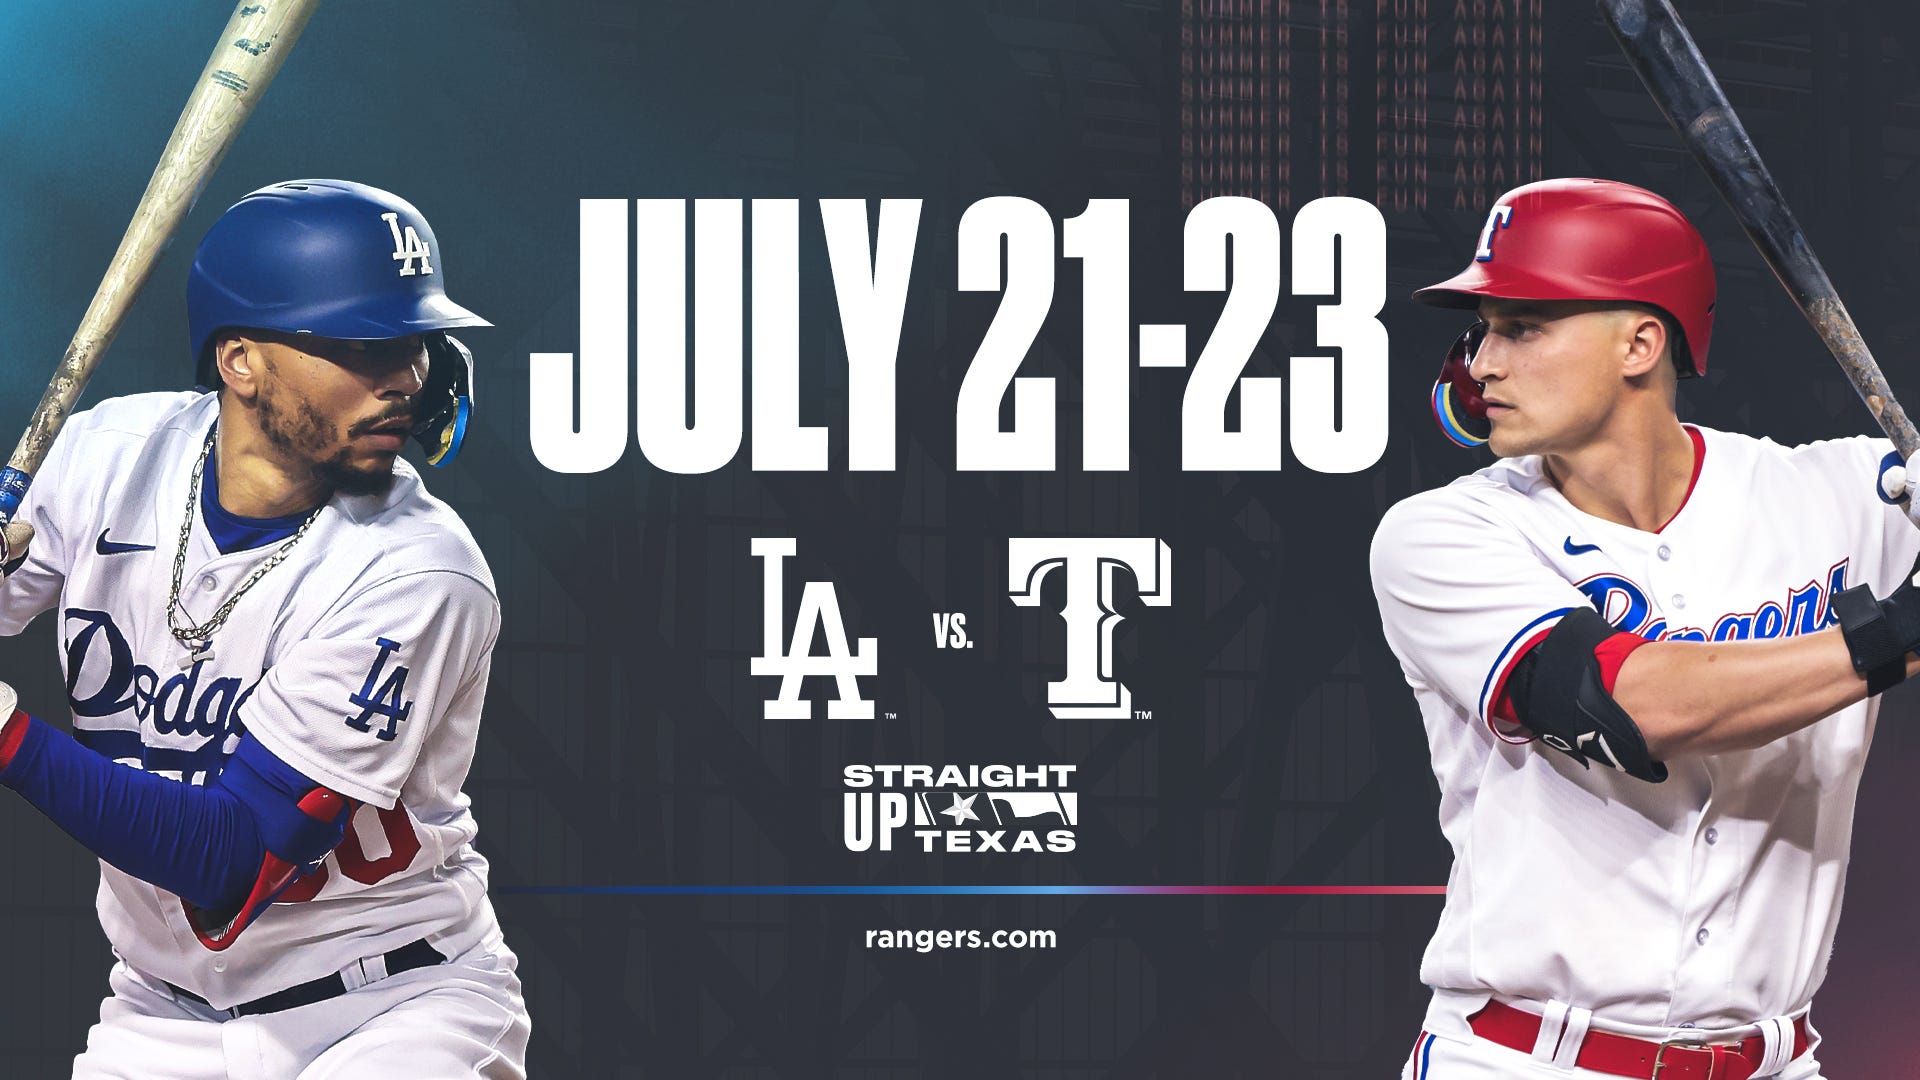 Texas Rangers to host 2024 All-Star Game - NBC Sports